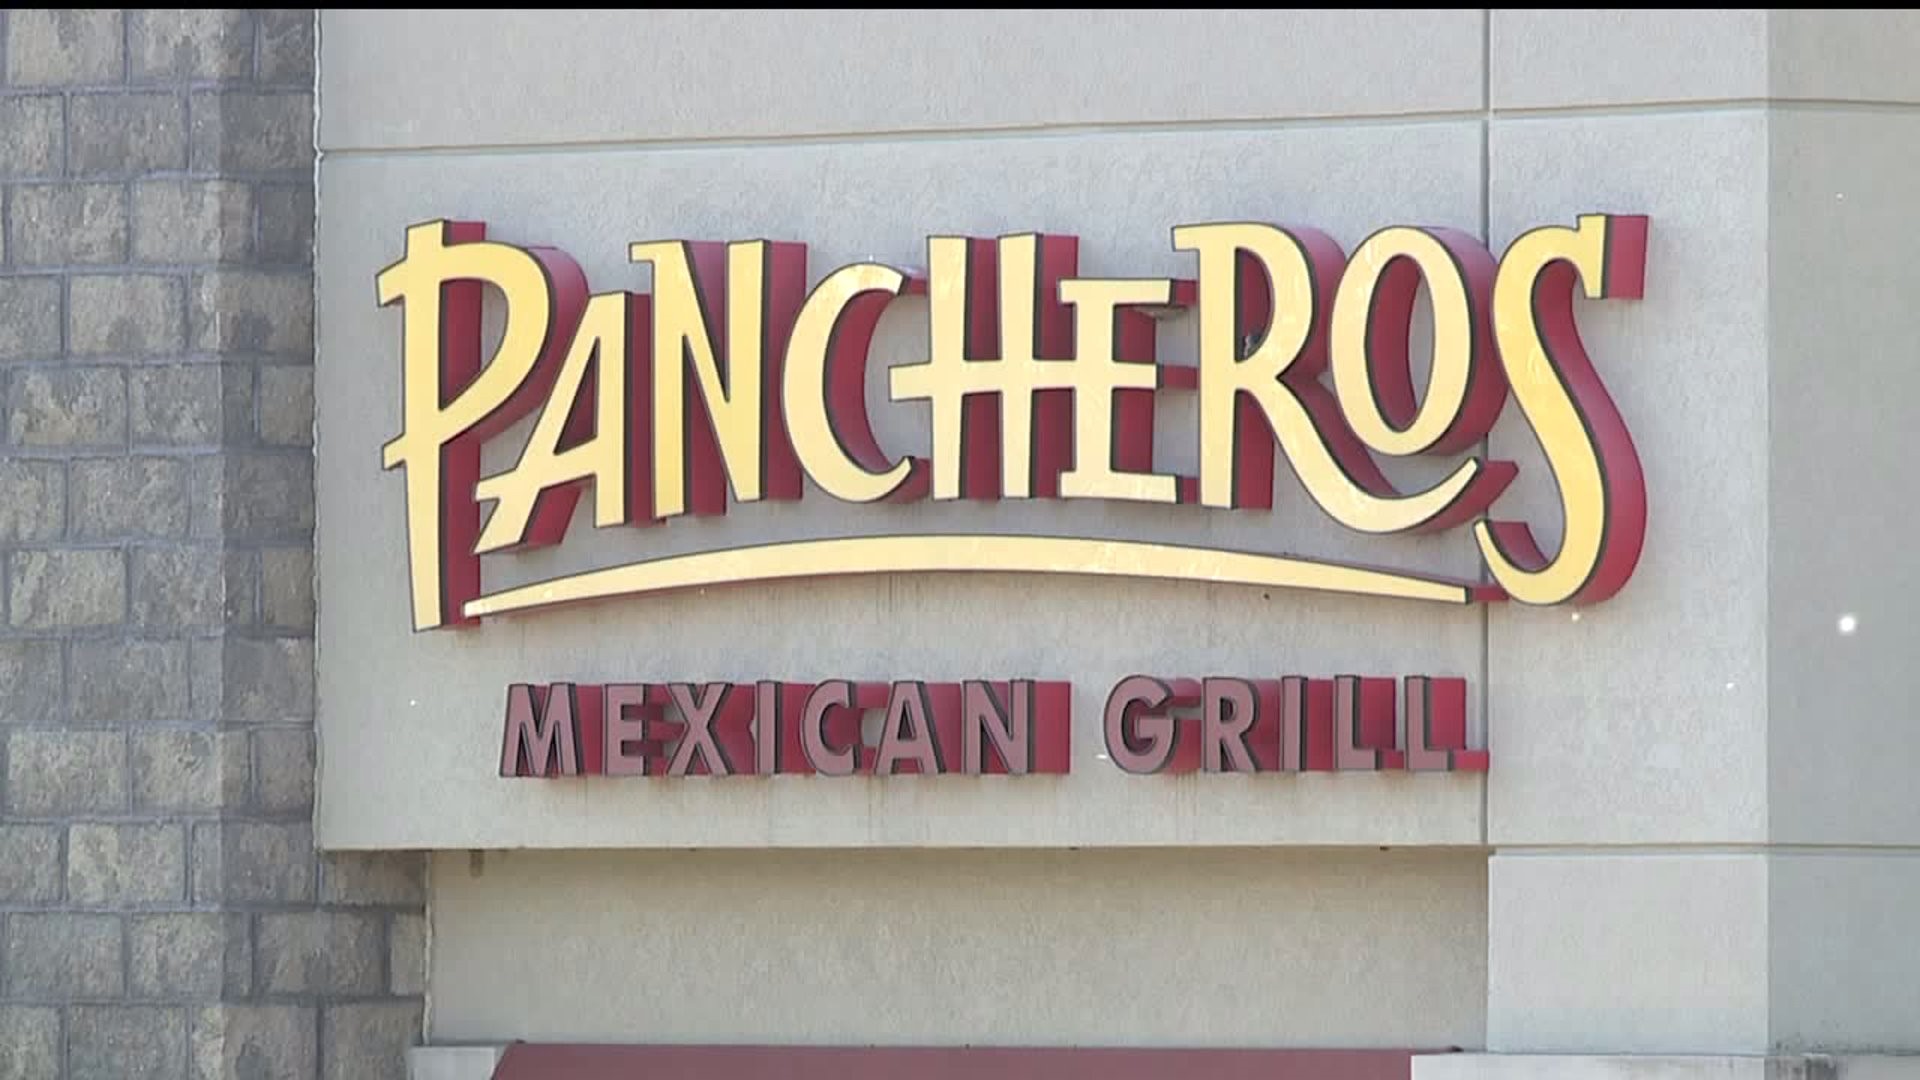 Man stabbed during fight with coworker at Pancheros in Davenport